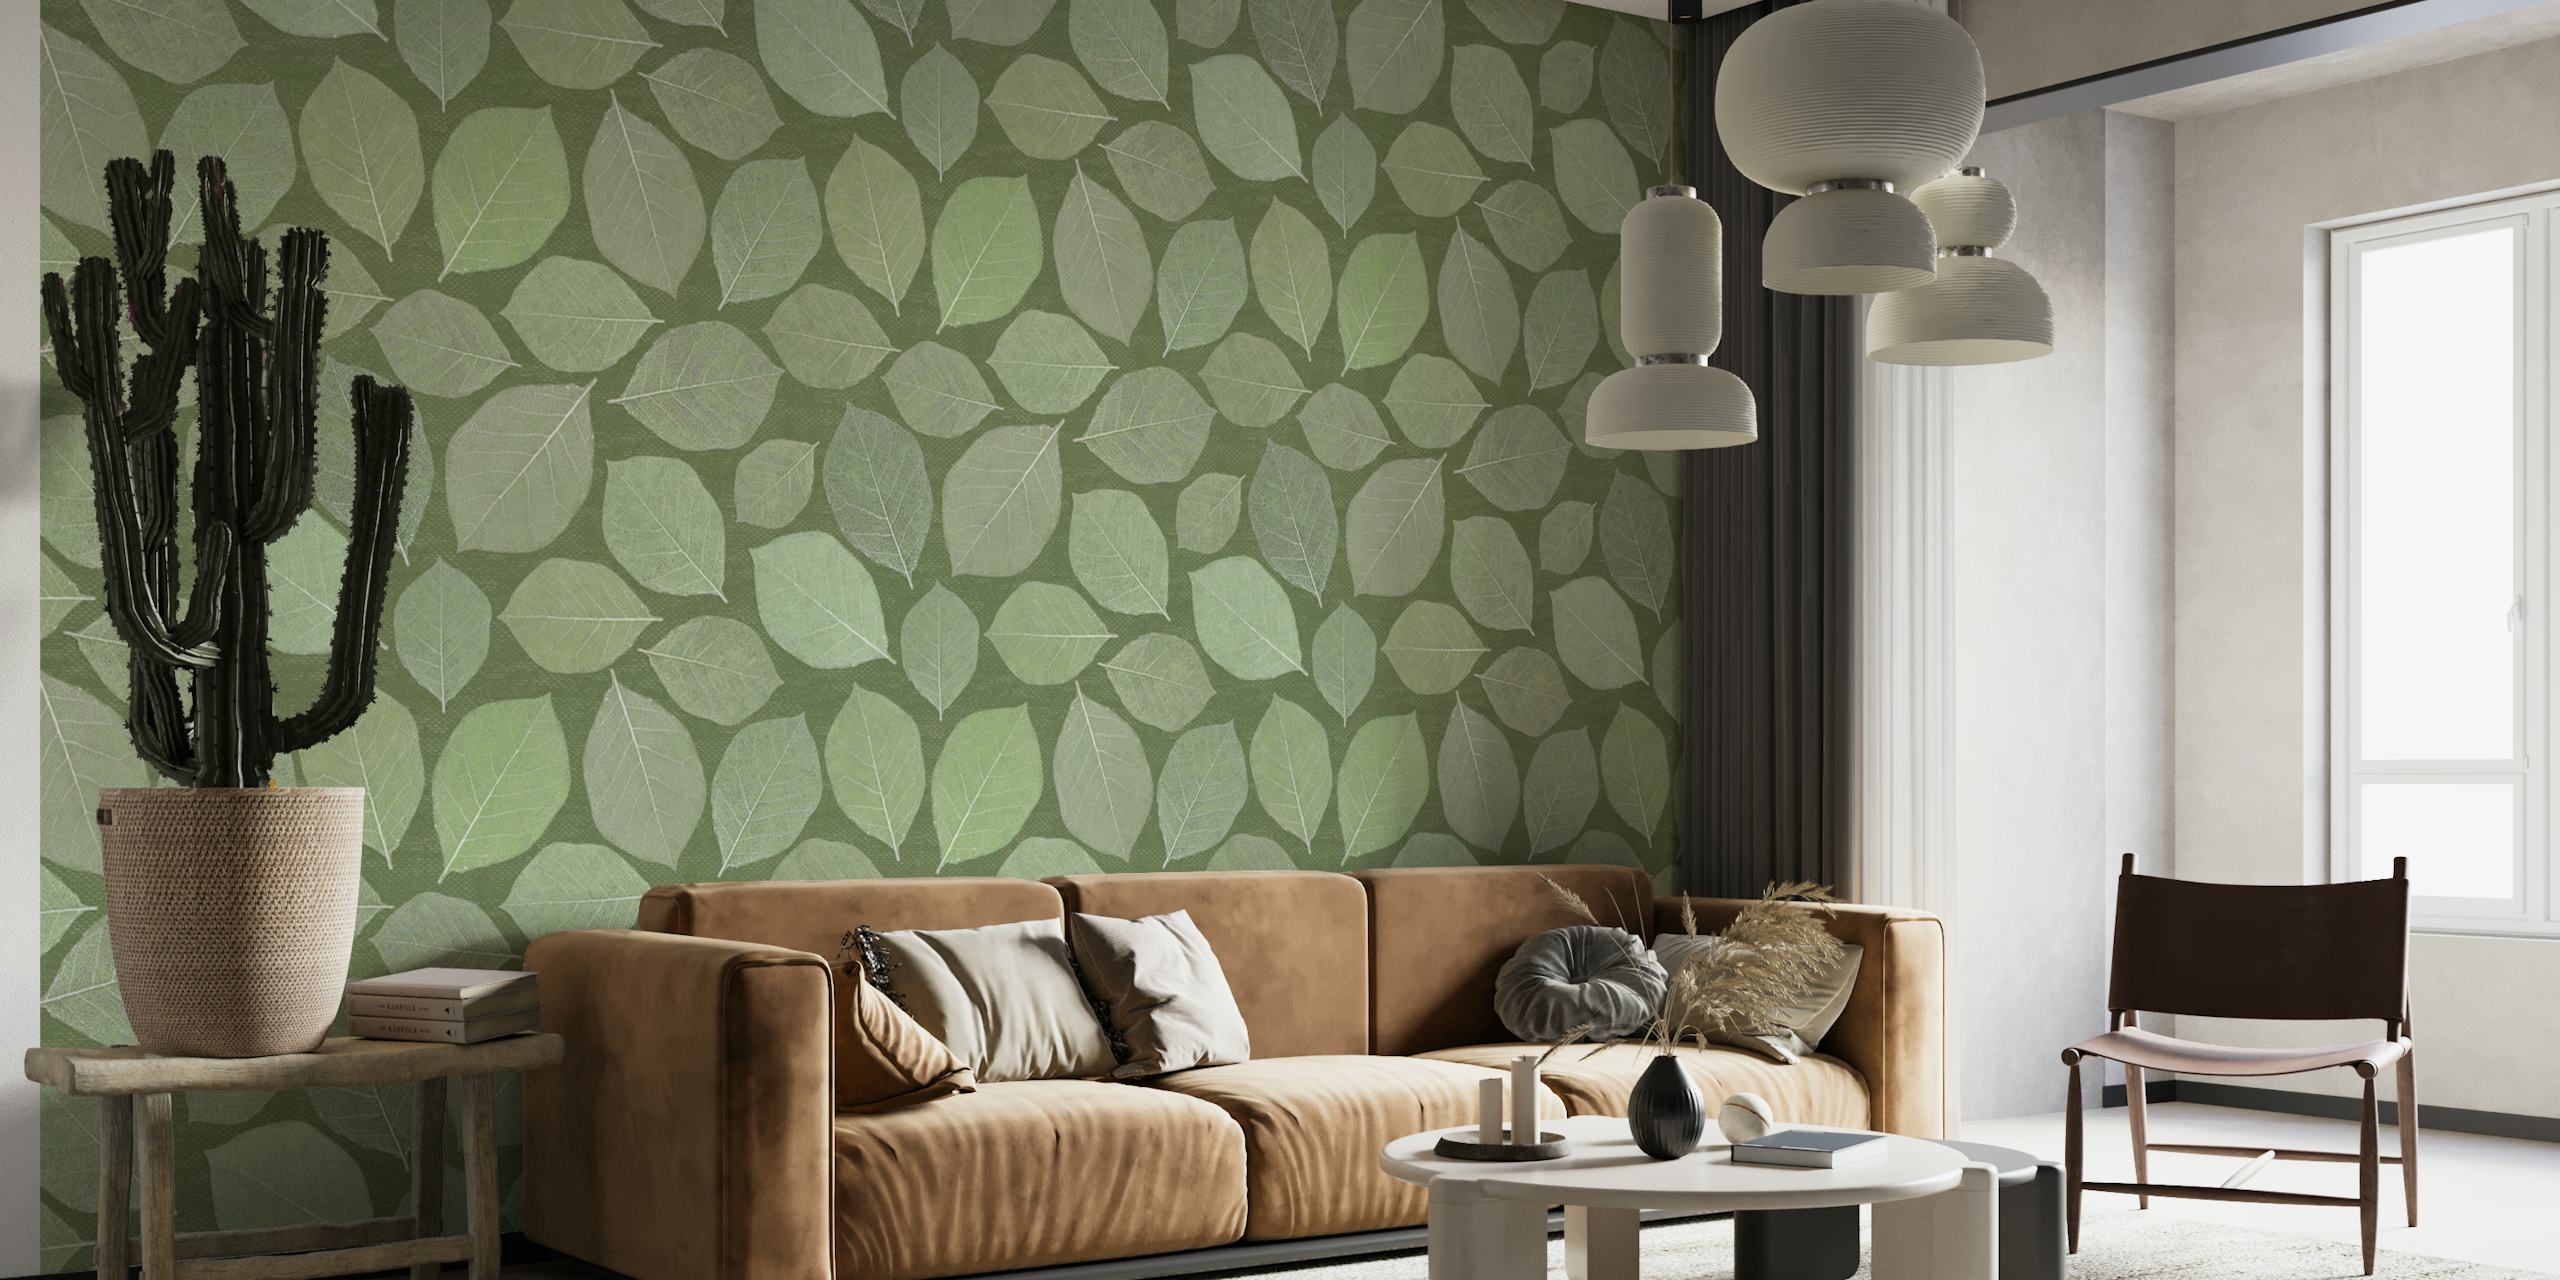 Wall mural of magnolia leaves in different green shades perfect for a tranquil interior decor